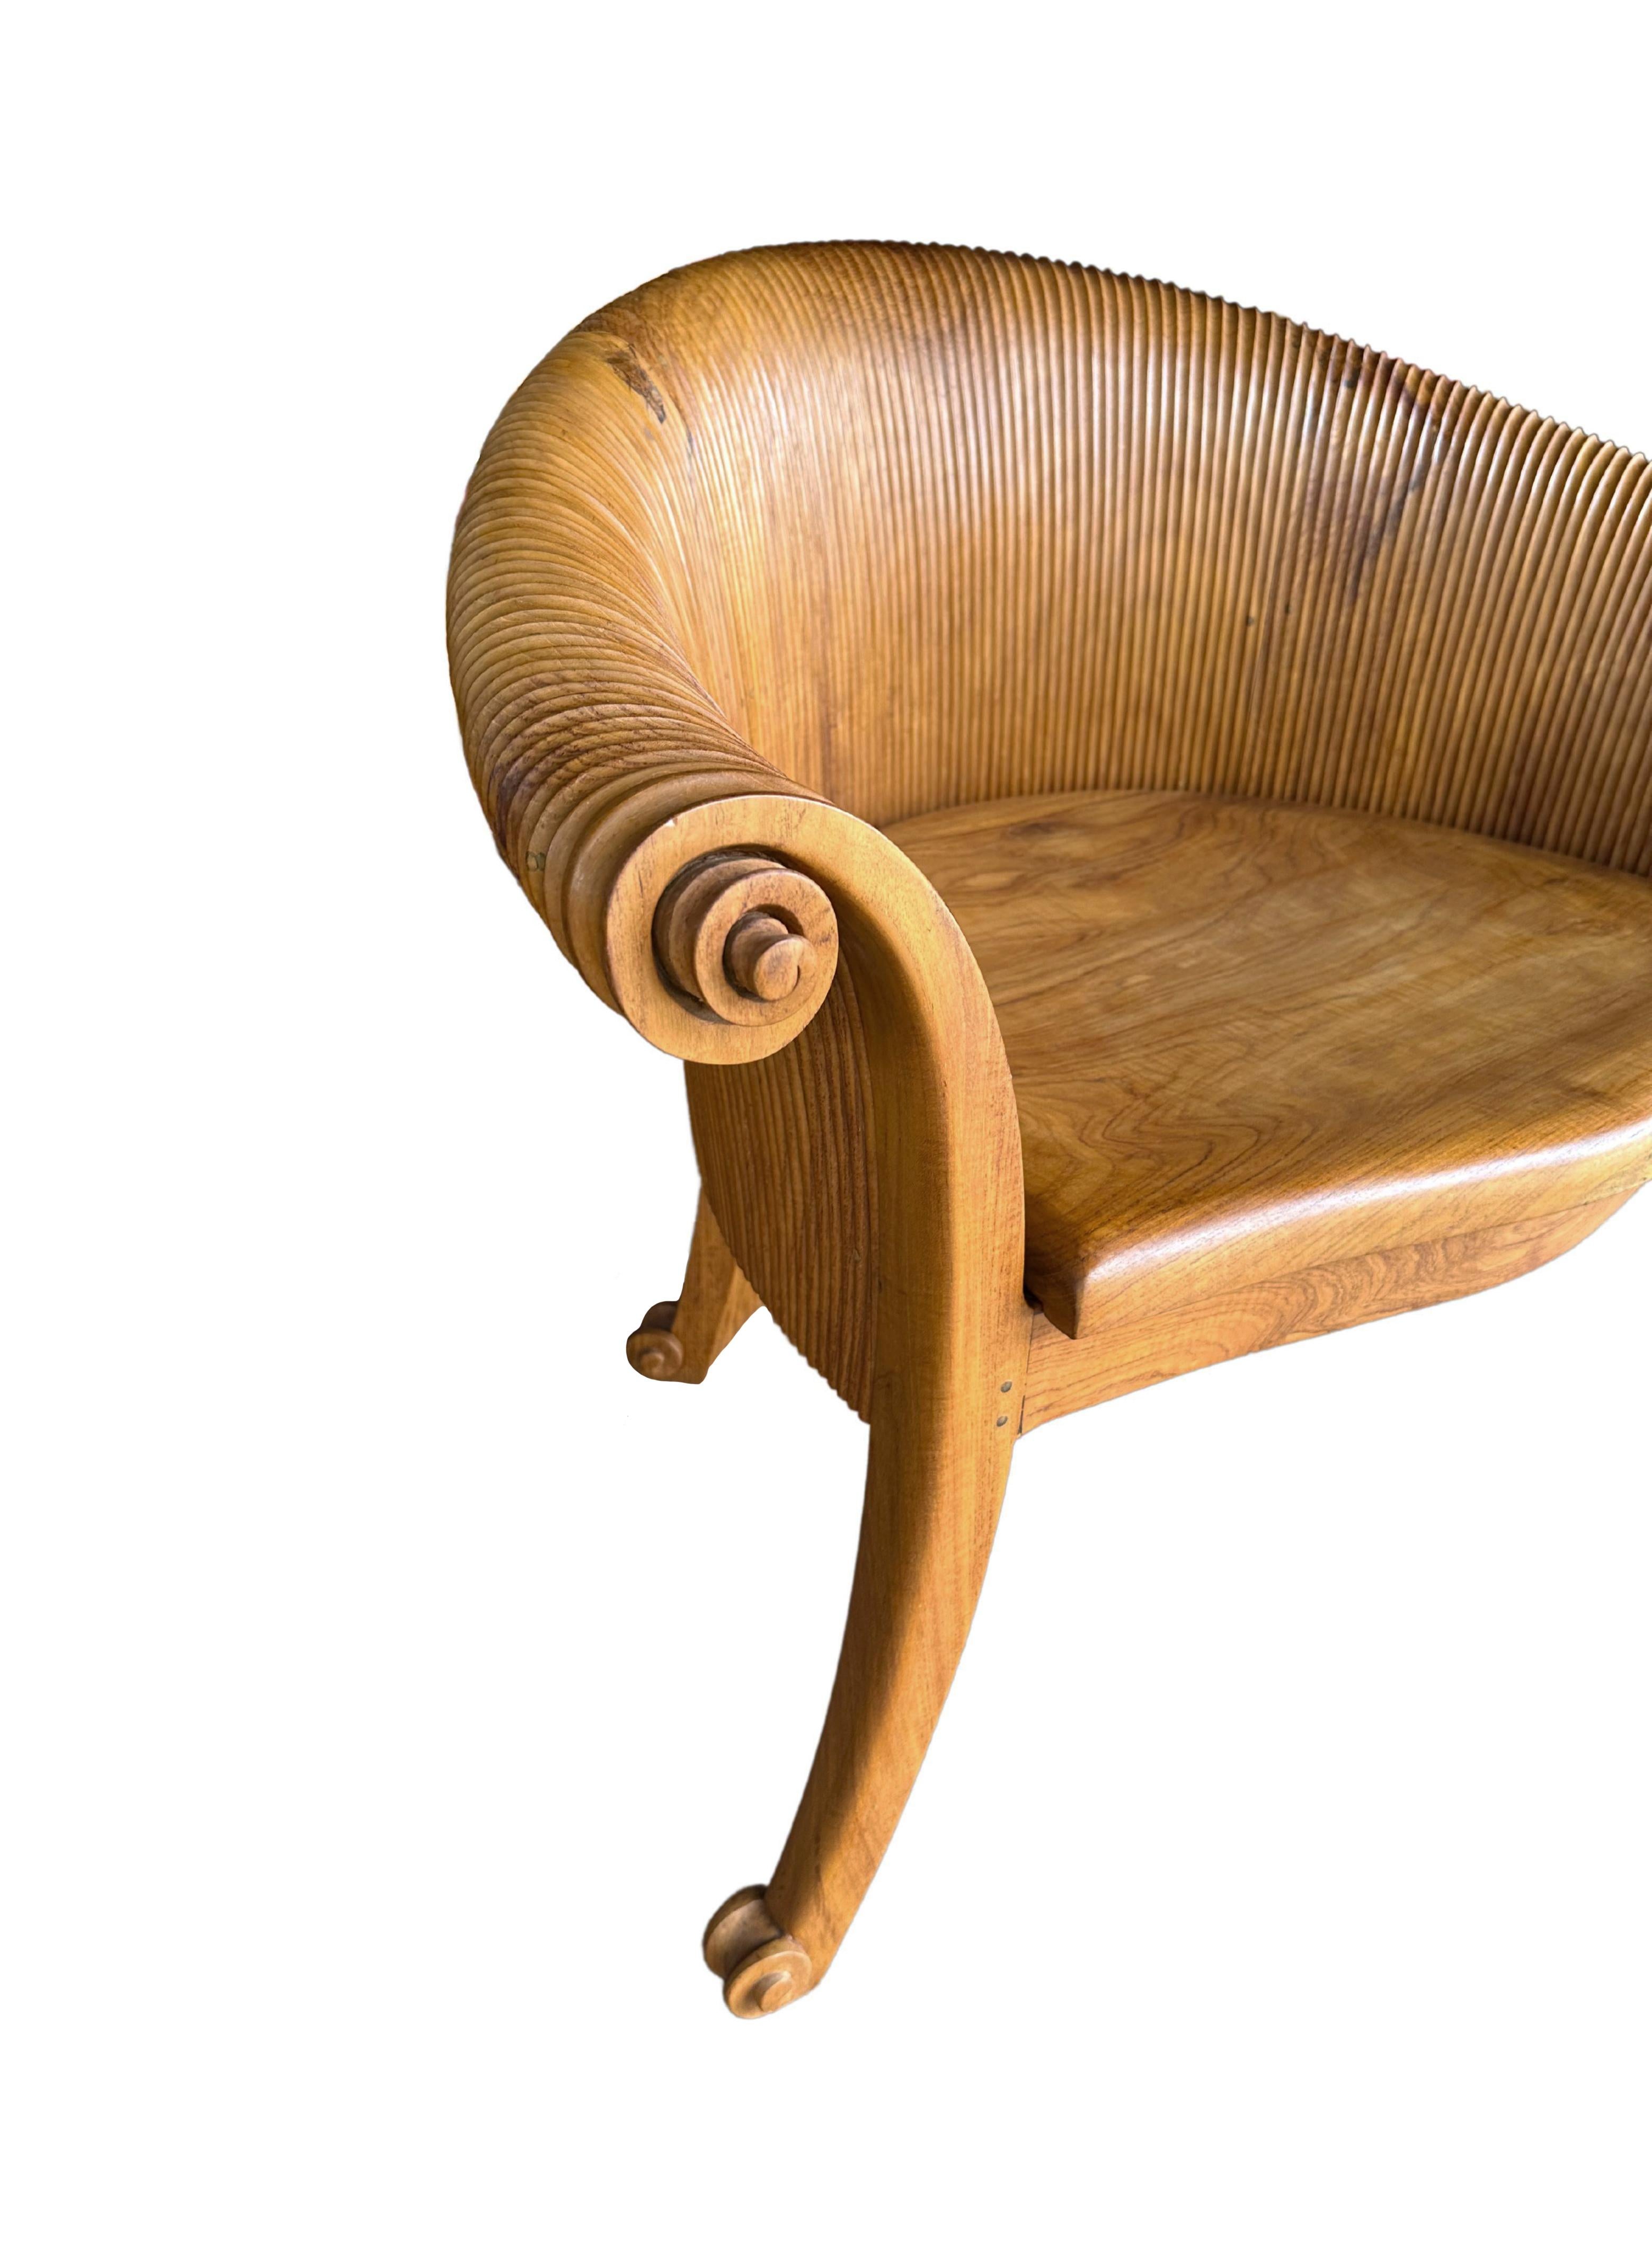 Indonesian Sculptural Teak Wood Chair with Carved Detailing For Sale